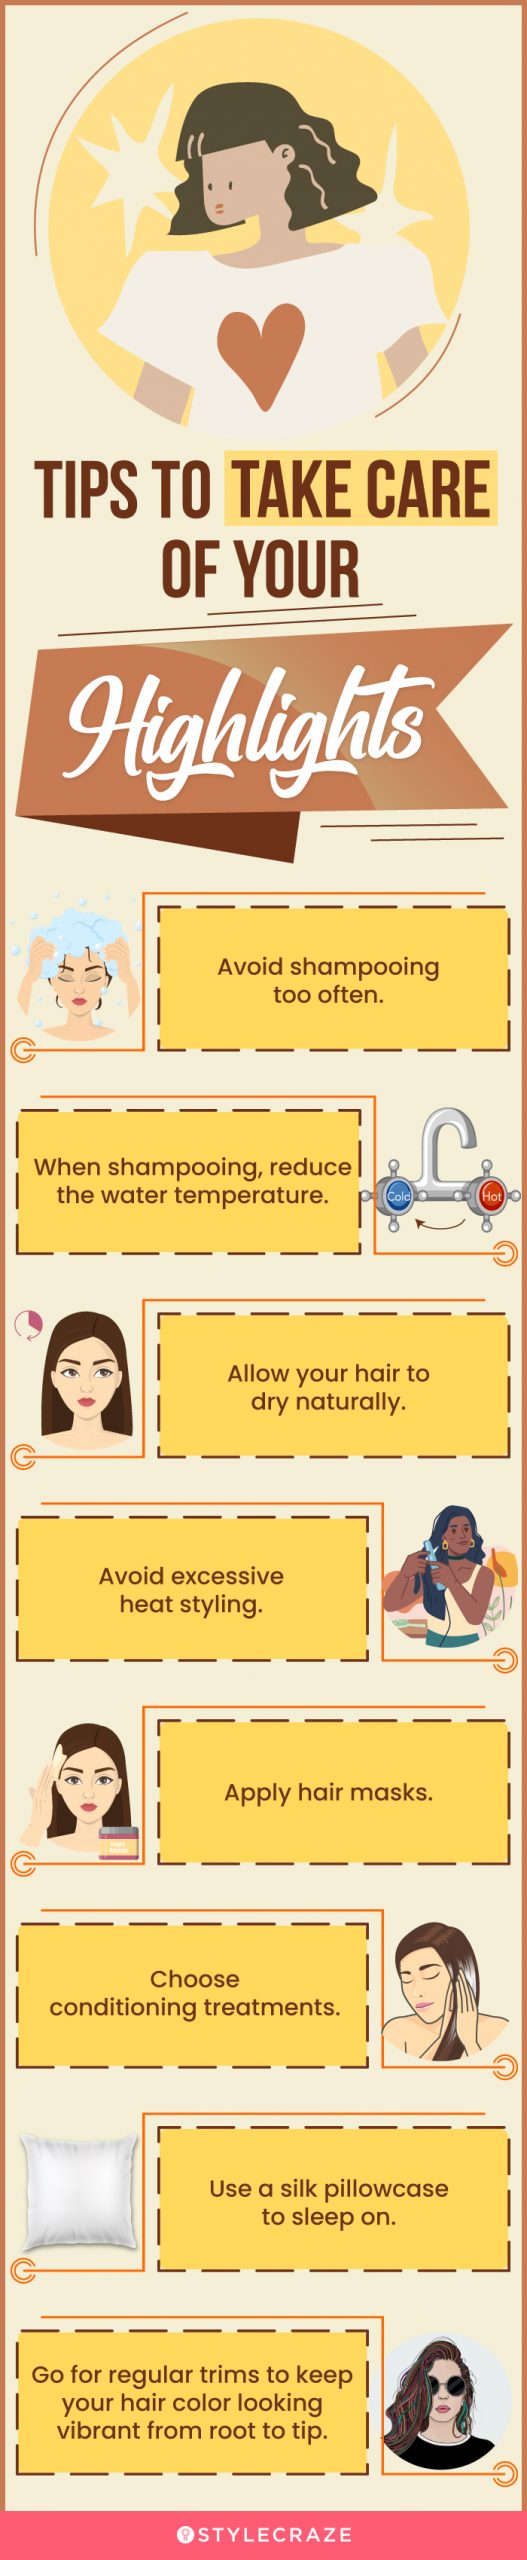 tips to take care of your highlights (infographic)